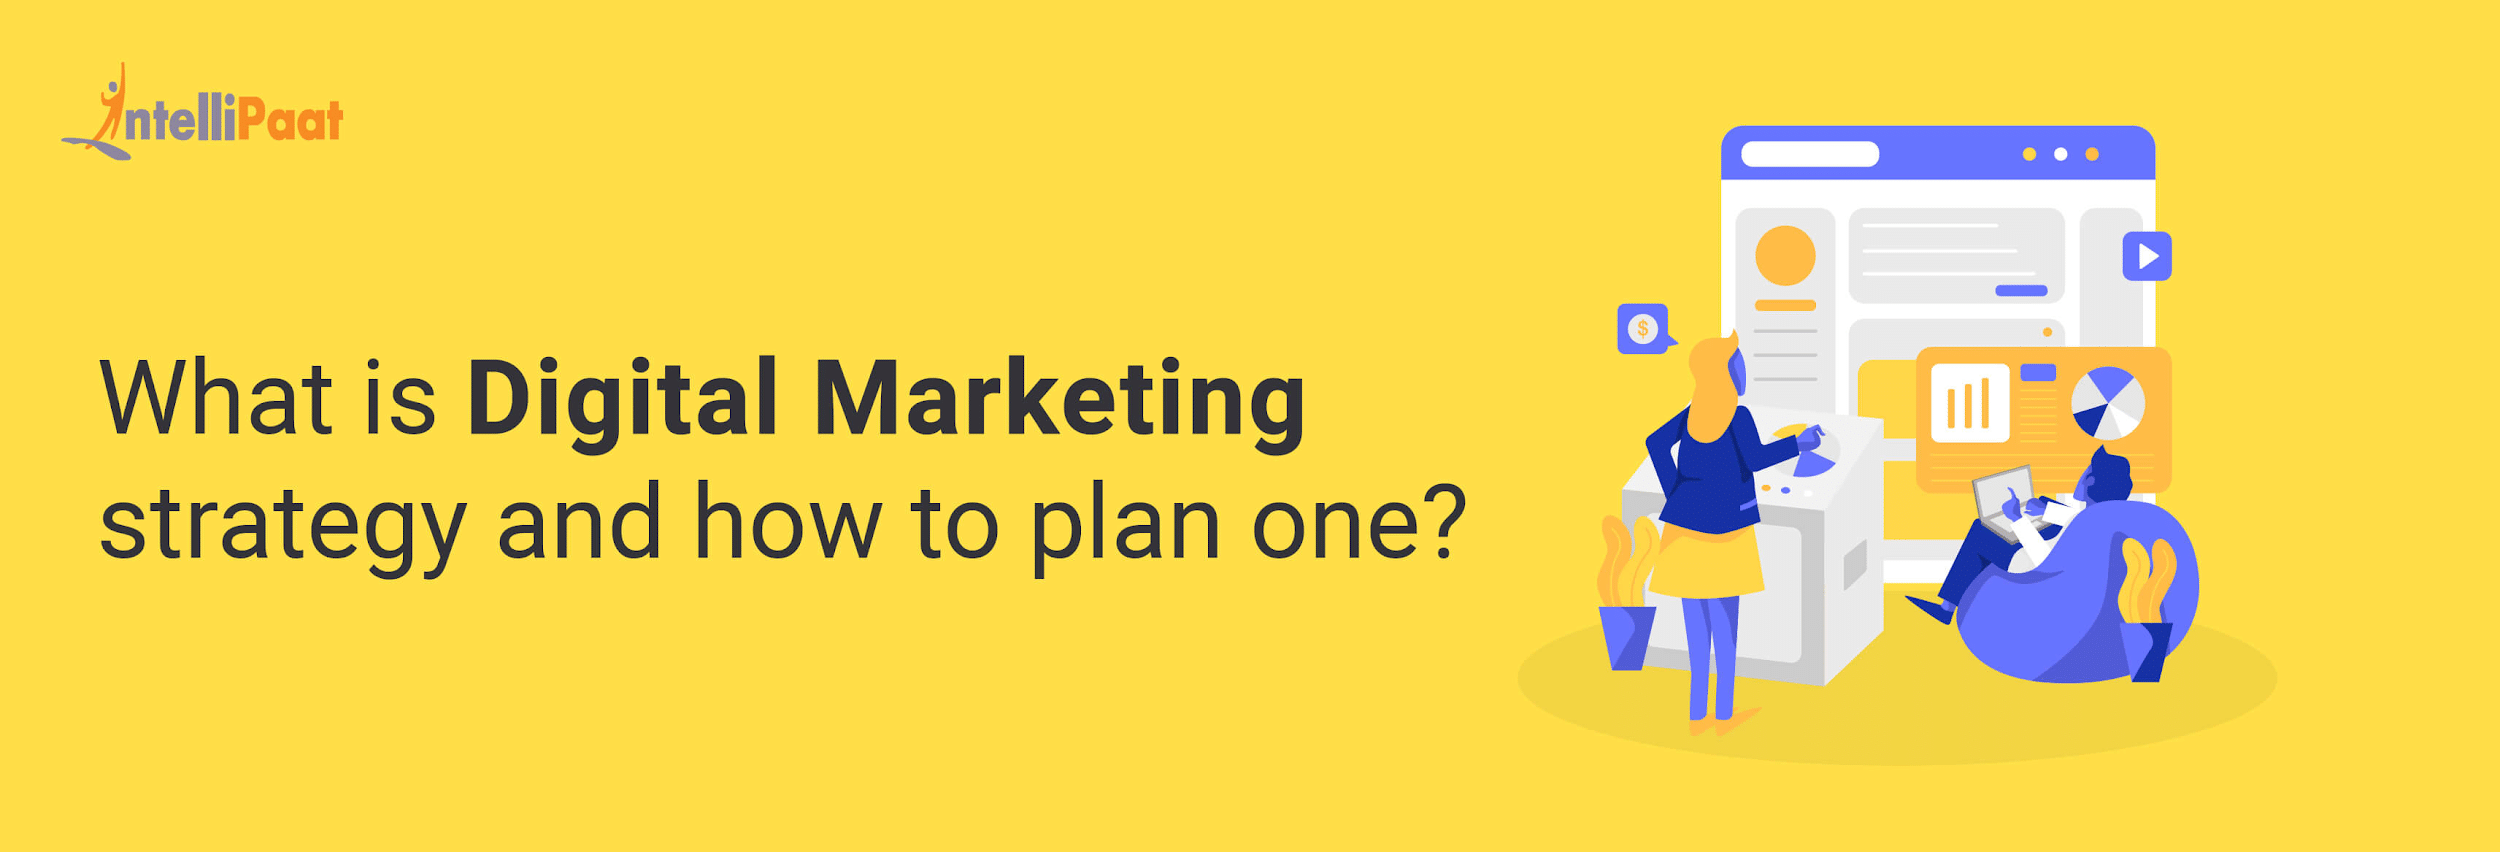 What is Digital Marketing Strategy and How to plan one?